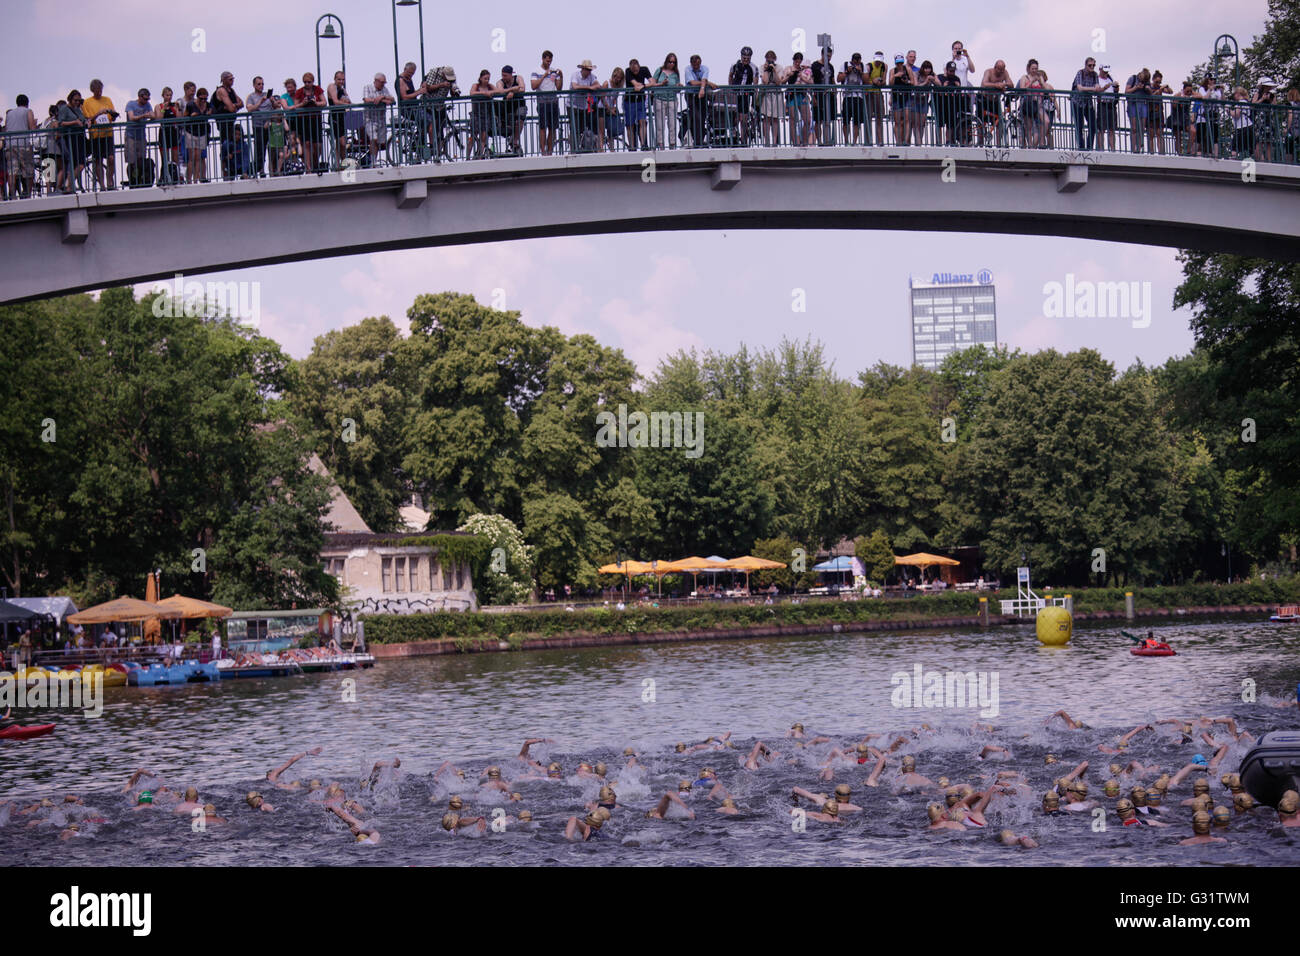 10 th edition of the Berlin Triathlon, which start with the disciplin of  swimming around the  Isle of Youth in Tretowerpark. After, the competitors takes the bicycles and start the 38 kilometer bike course which runs along the Plänterwald . Then they run 10,25 km. Other categories have shorter distances. Stock Photo